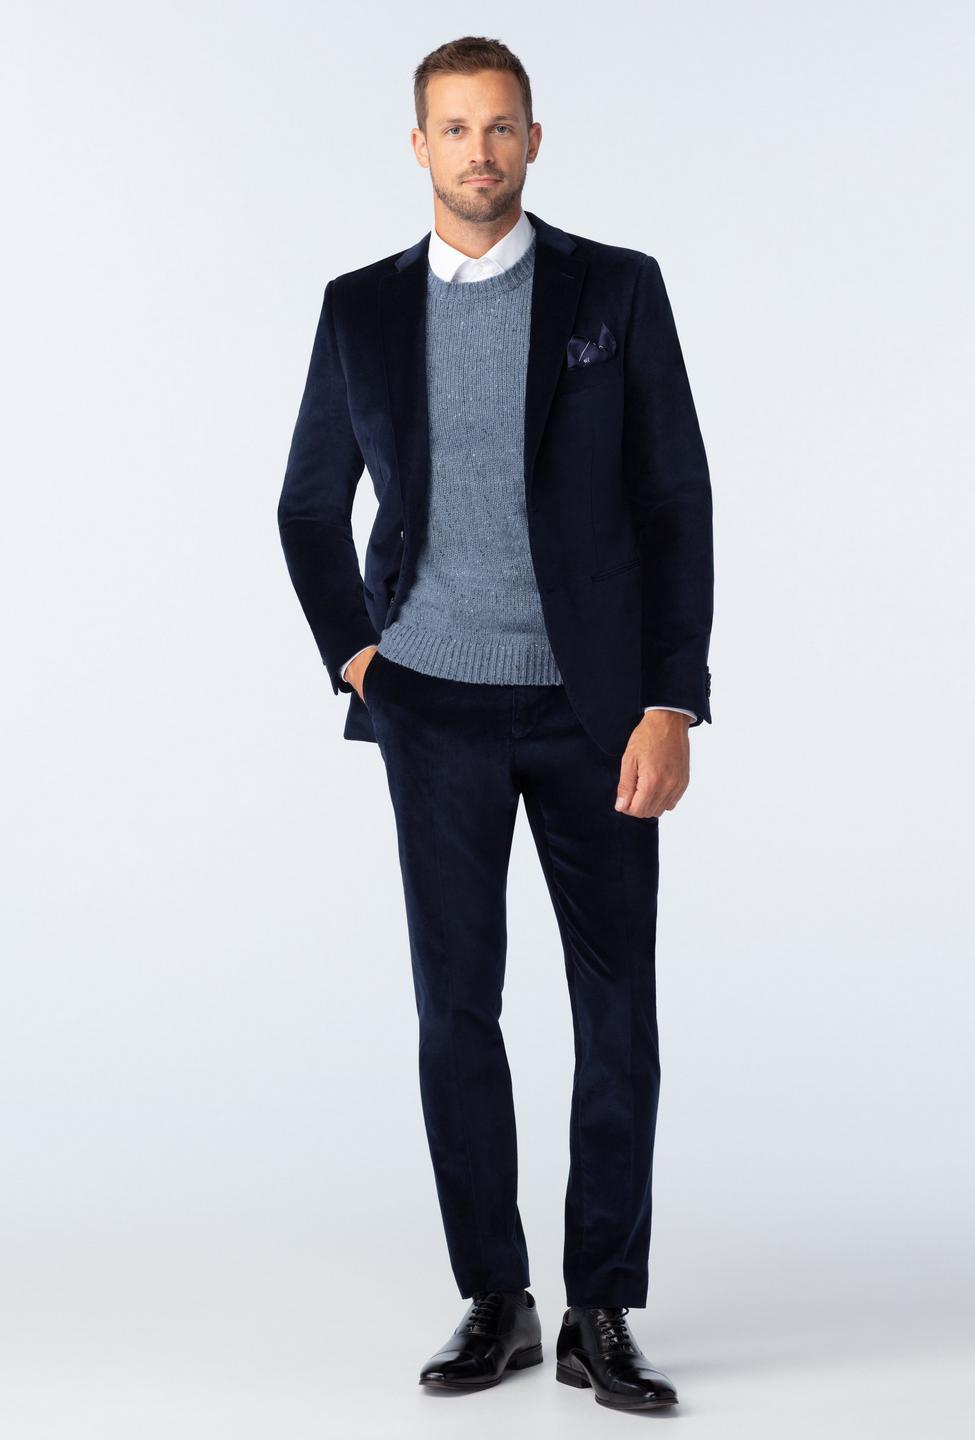 Navy suit - Harford Solid Design from Premium Indochino Collection